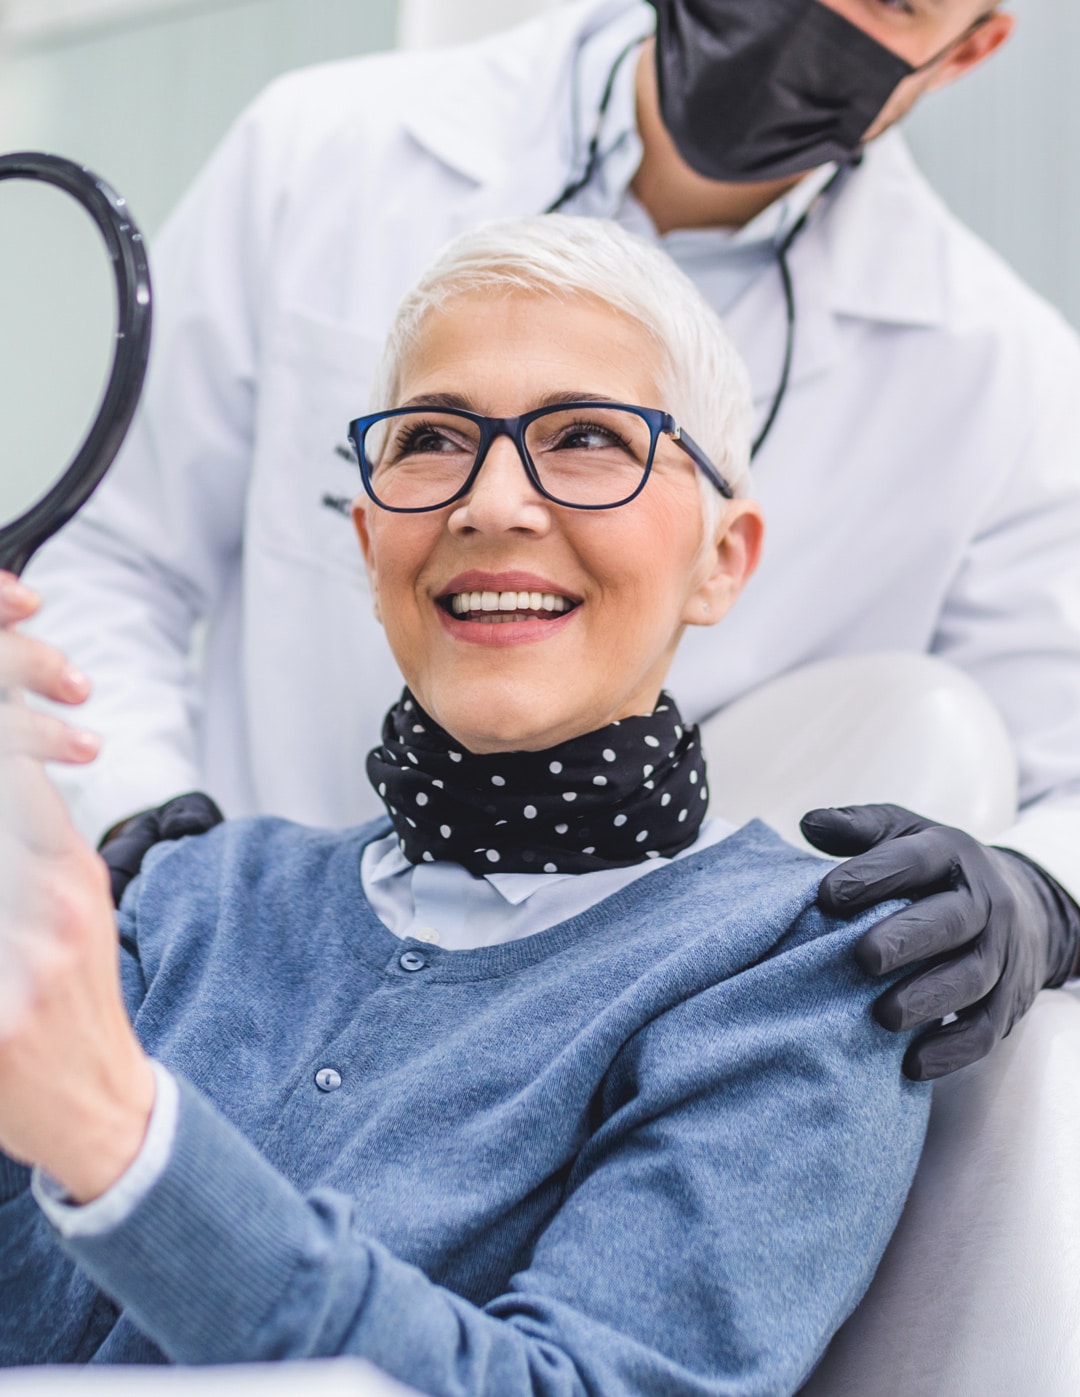 An older woman with white hair and glasses at a dentist office looking at herself in a hand mirror